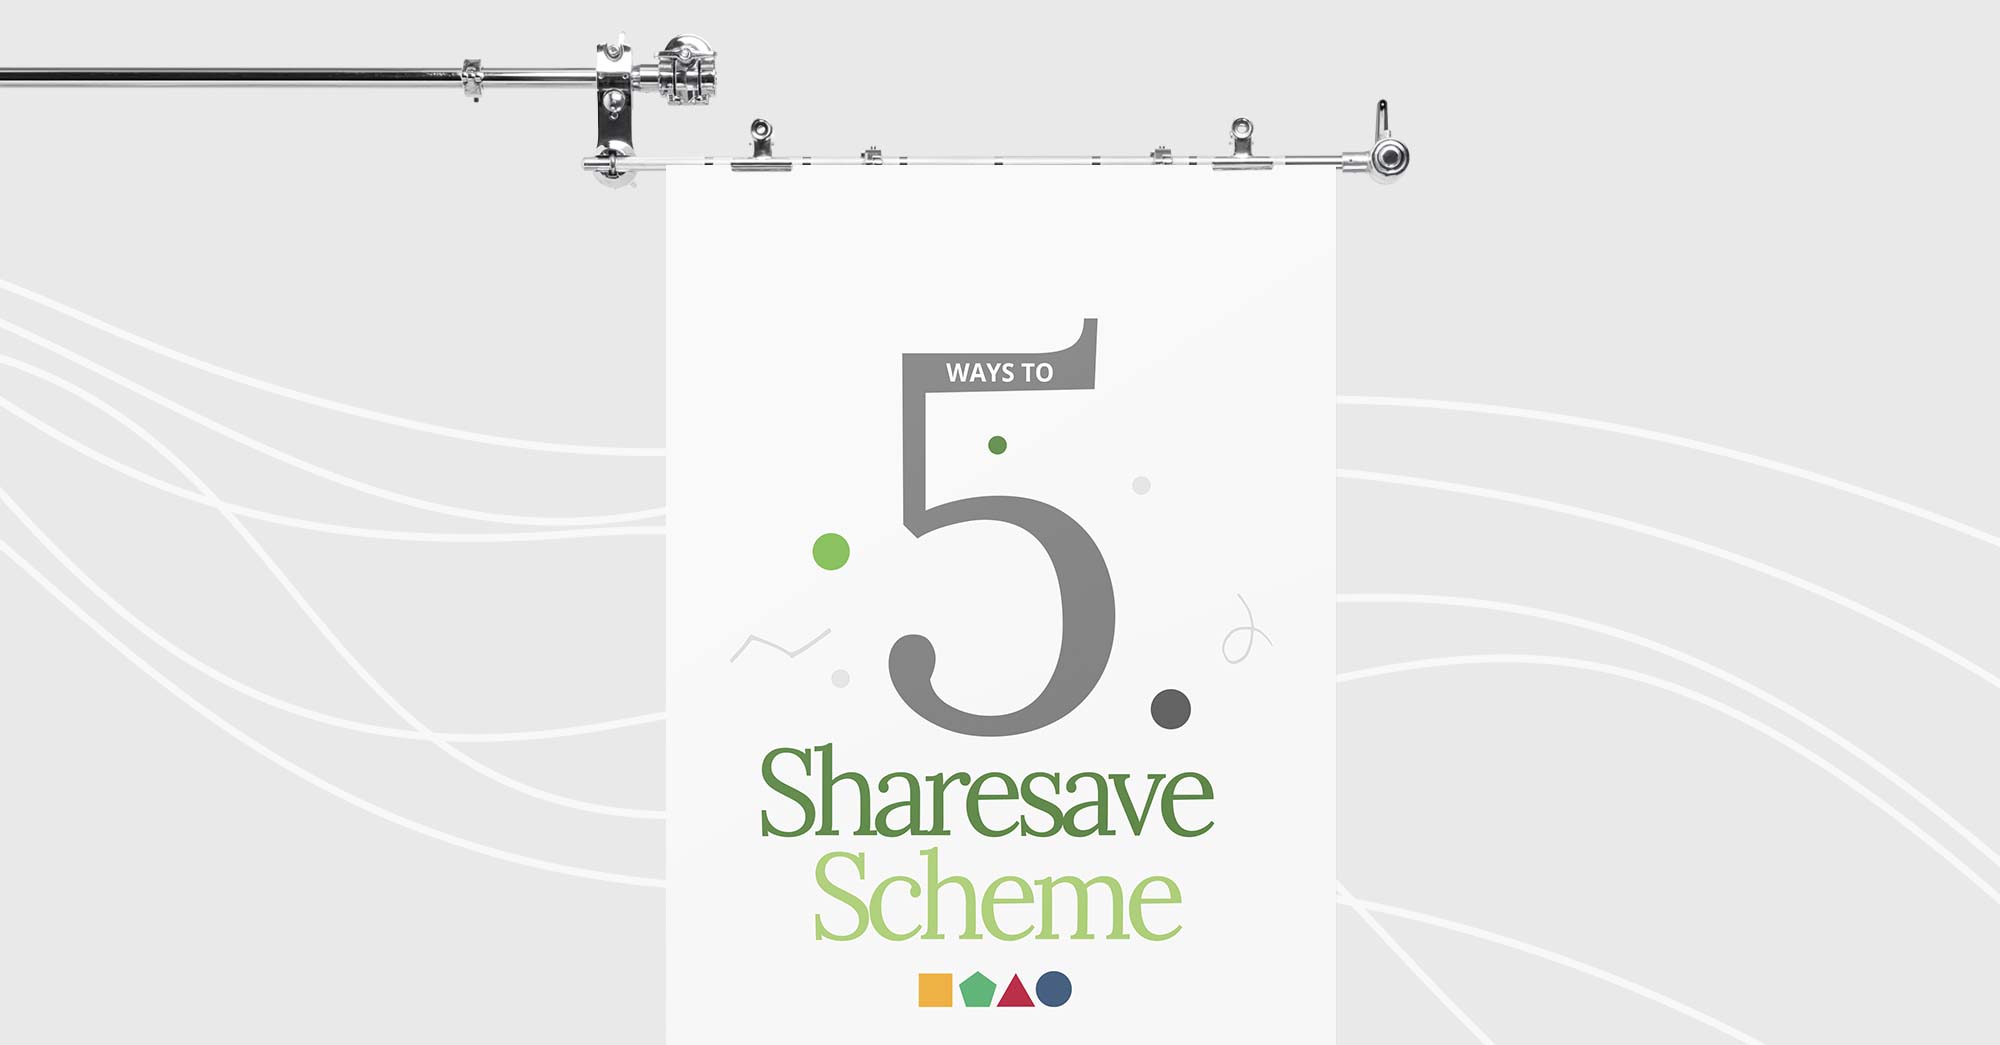 How to improve Sharesave enrolment: Communicate Now!